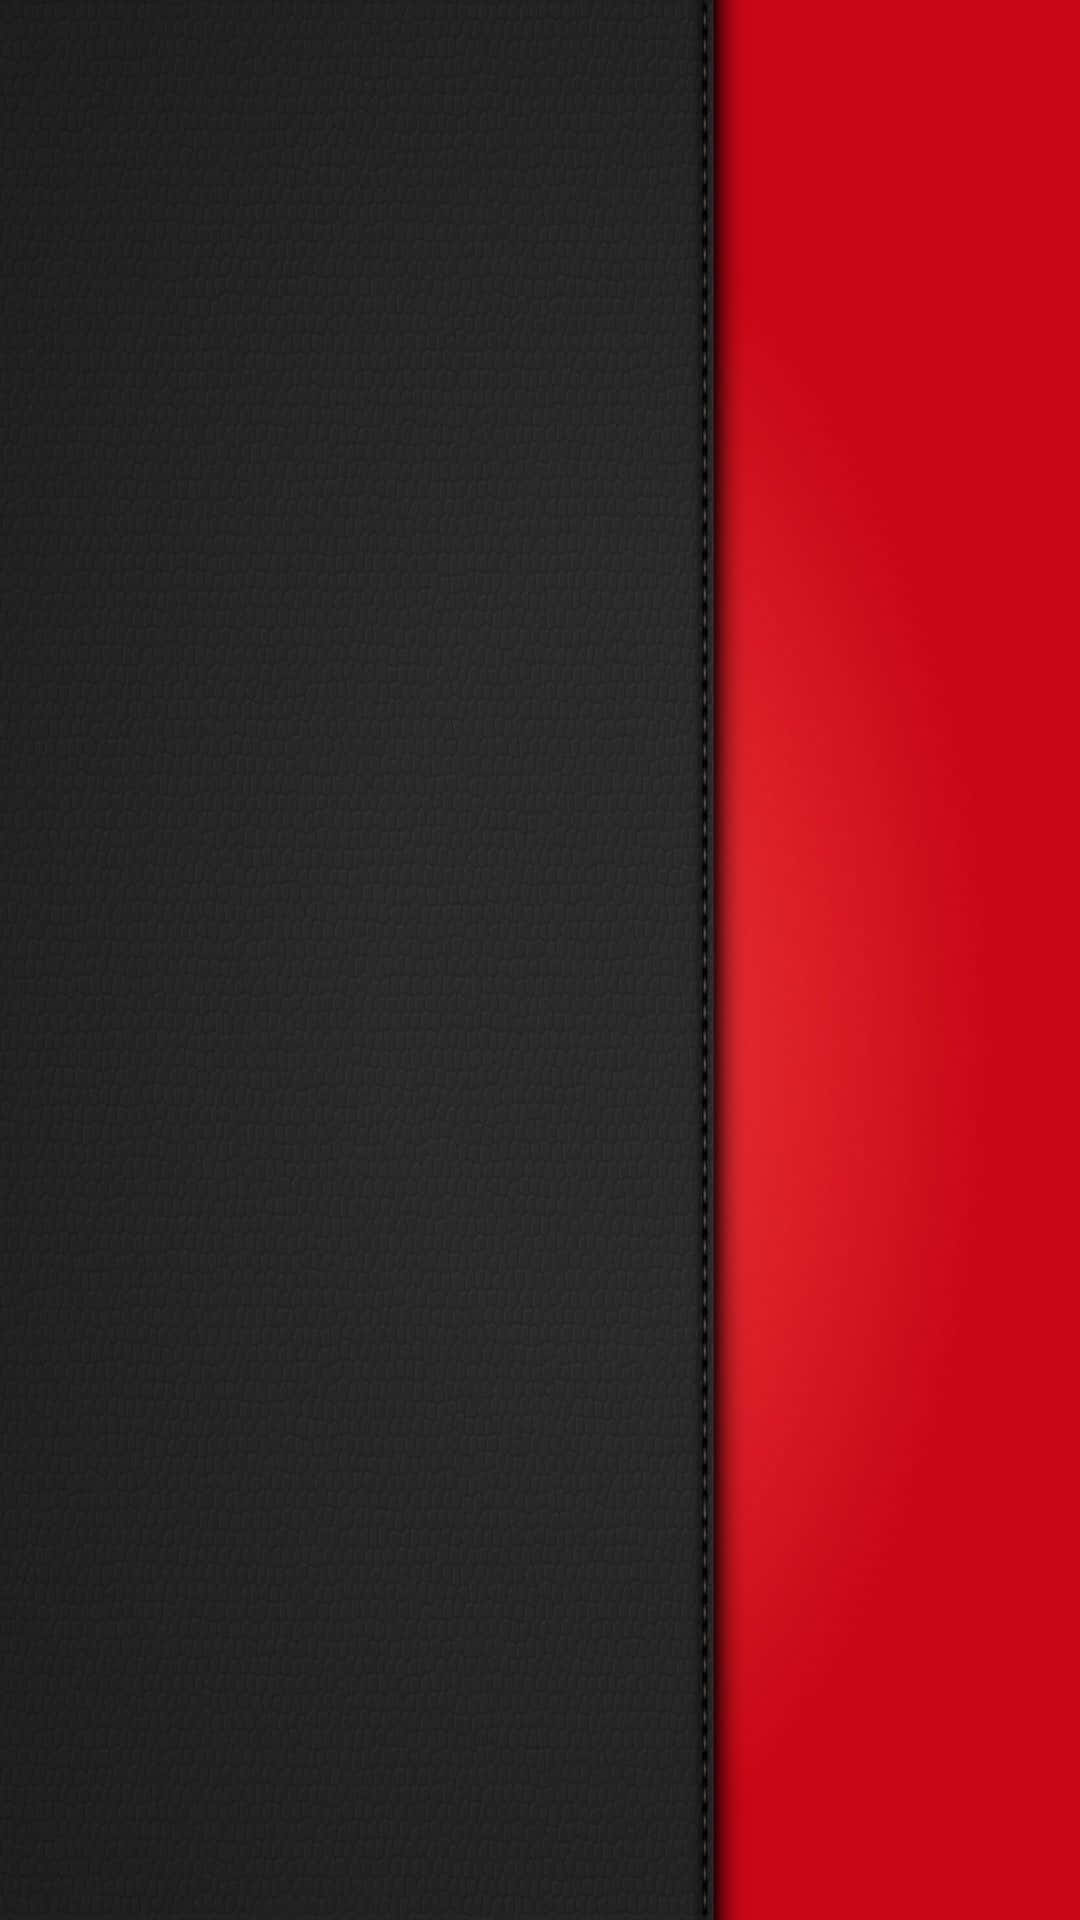 The Latest Black Red iPhone with Sleek Design Wallpaper